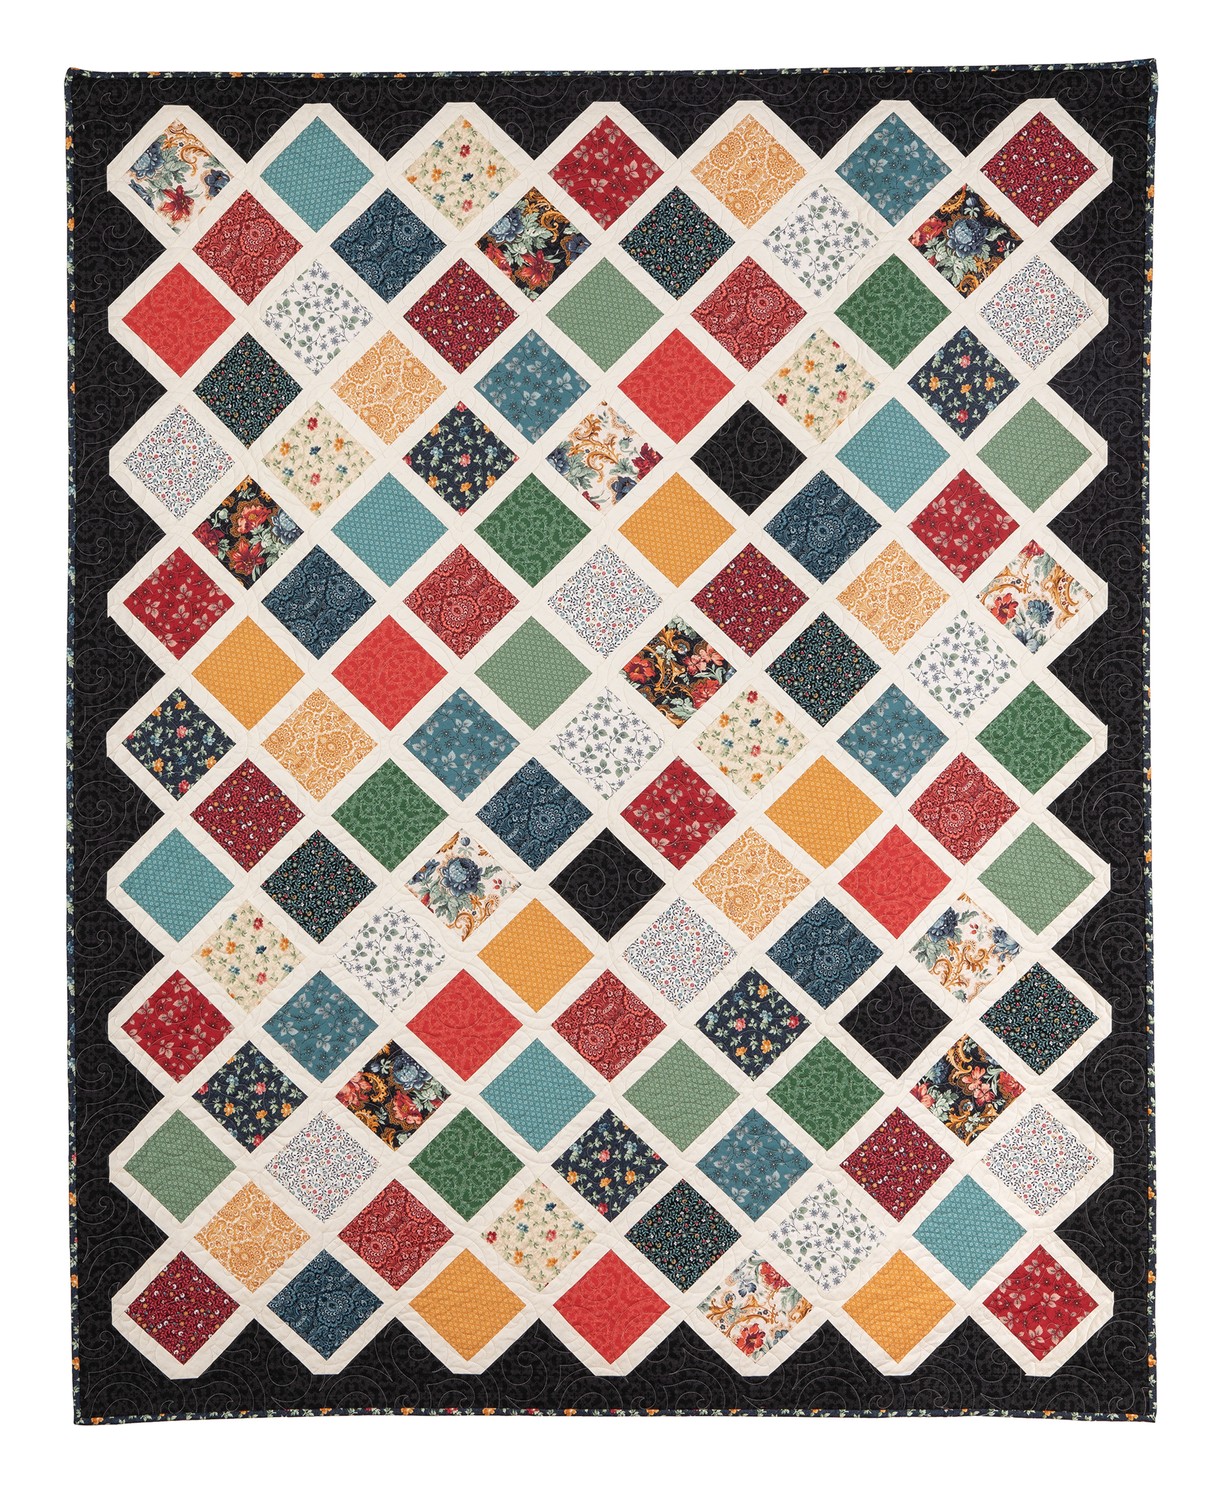 Squares and Rectangles Throw Quilt